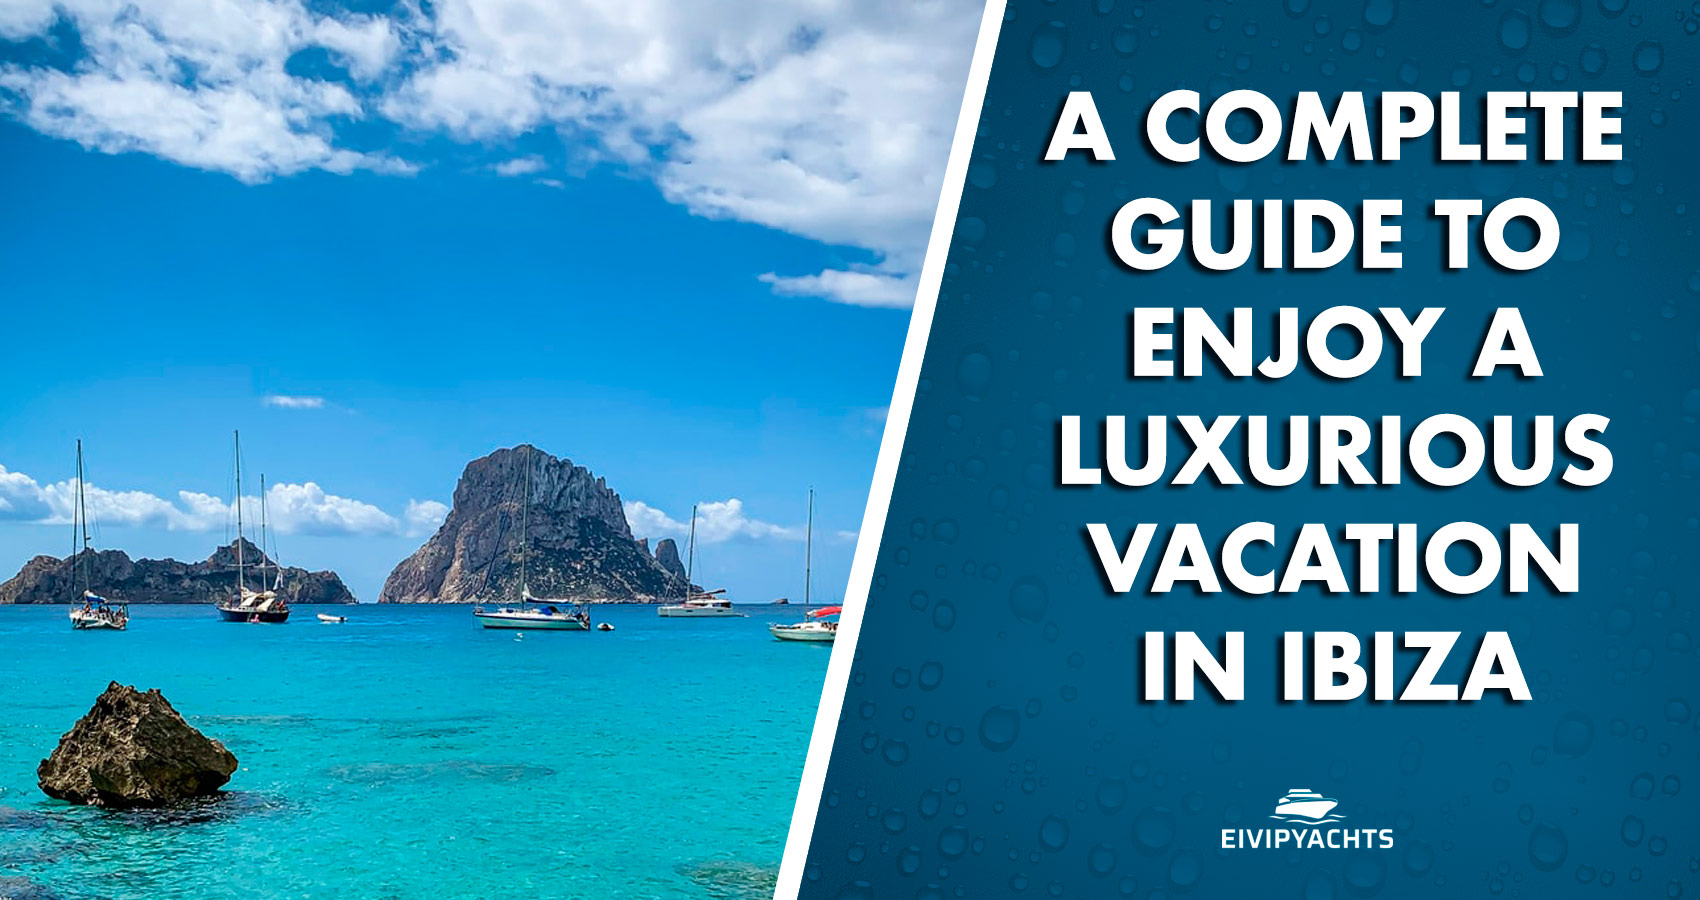 A complete guide to enjoy a luxurious vacation in Ibiza